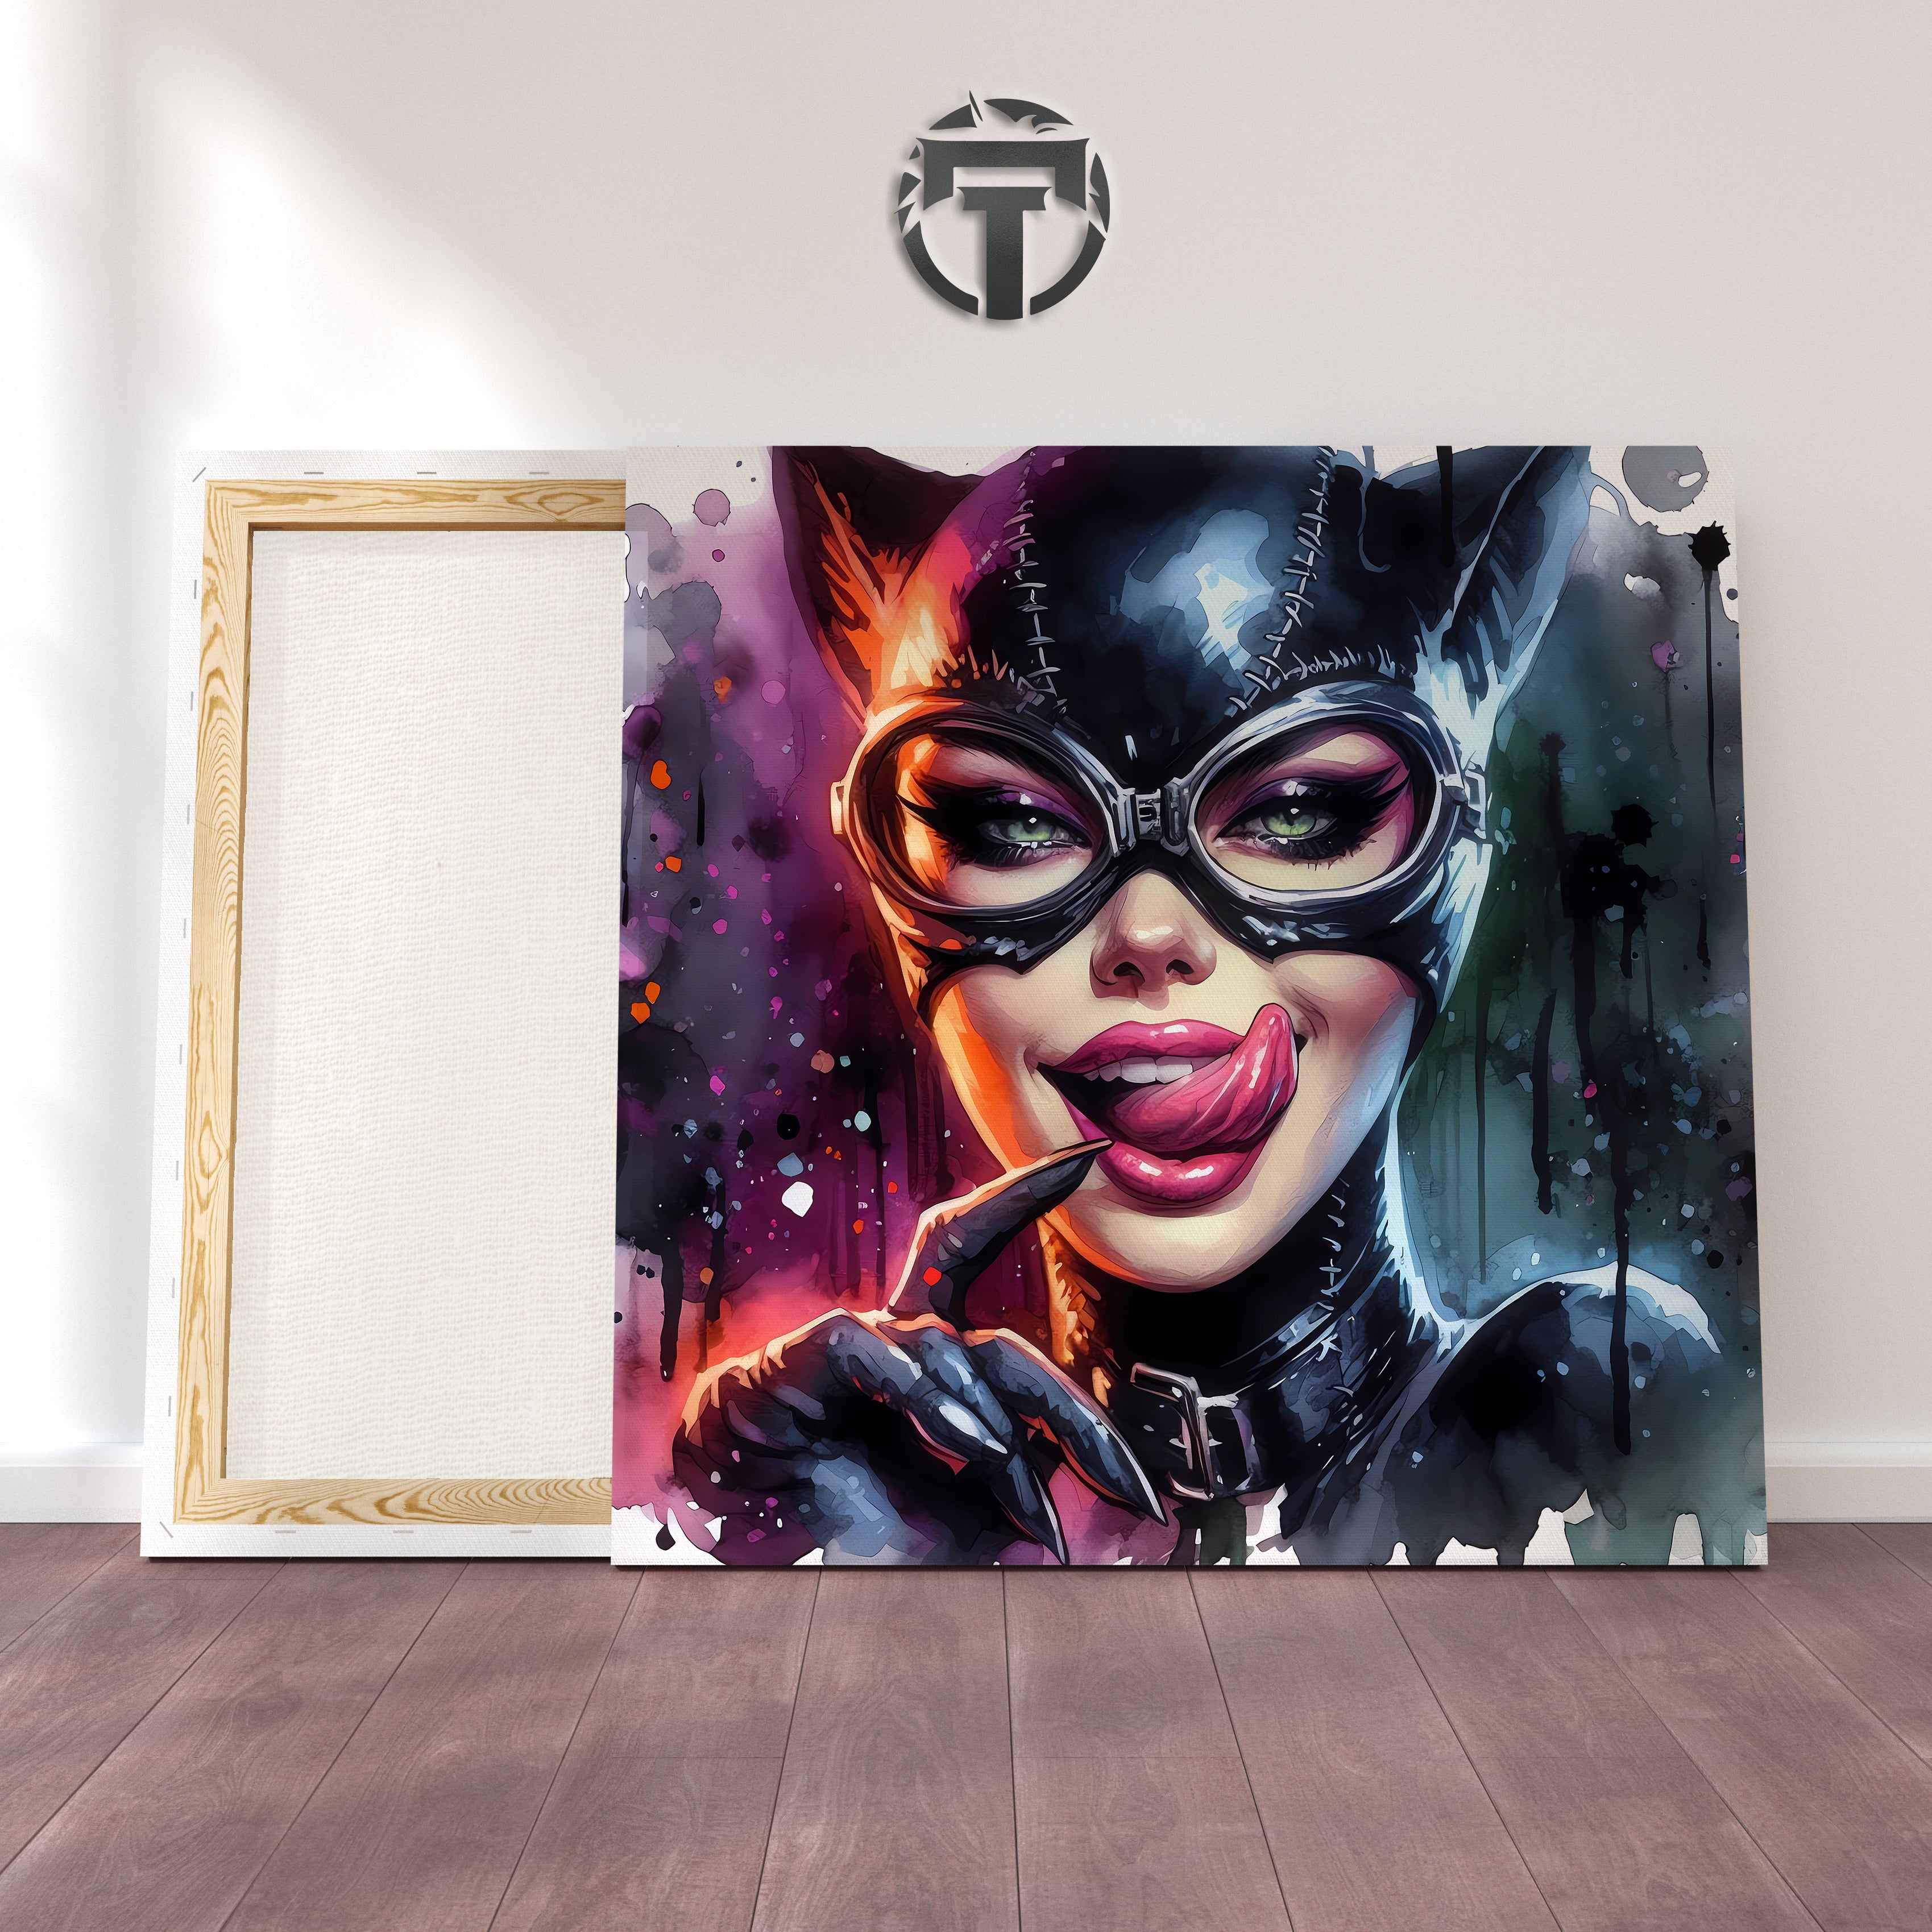 Feline Fury: Catwoman Canvas Art (Tongue Lashing the Competition)